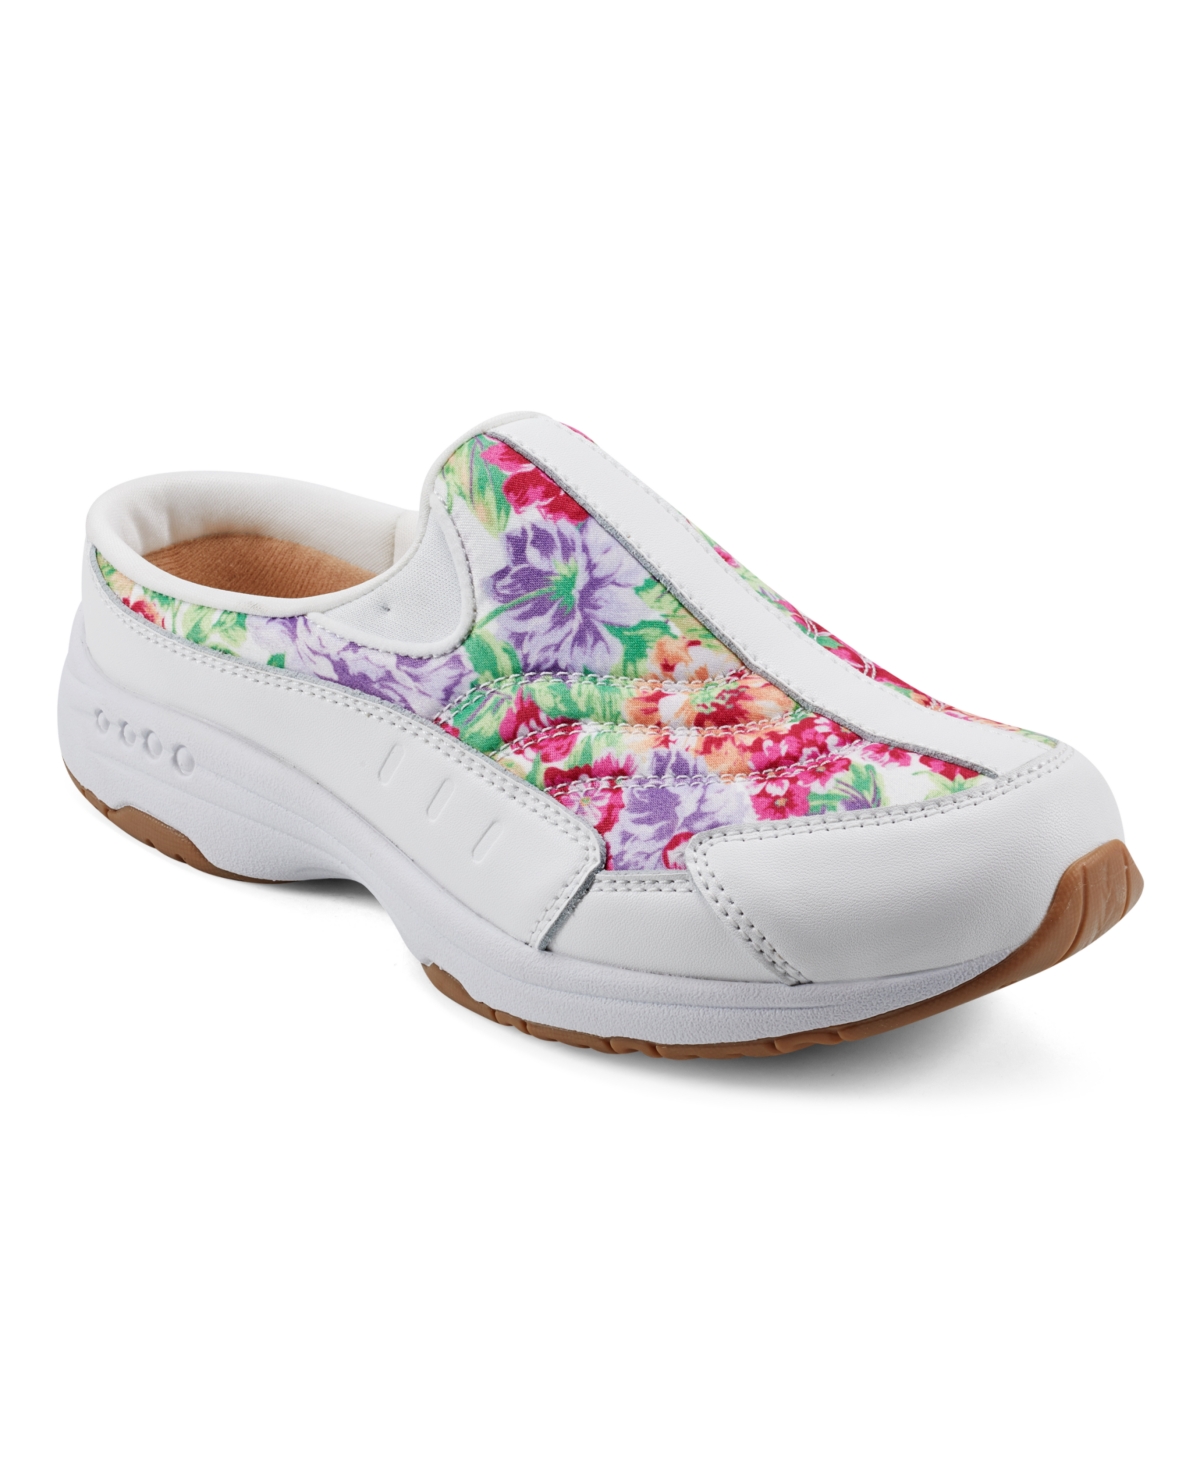 Easy Spirit Women's Traveltime Casual Slip-on Mules In White,pink Floral Multi - Leather,text